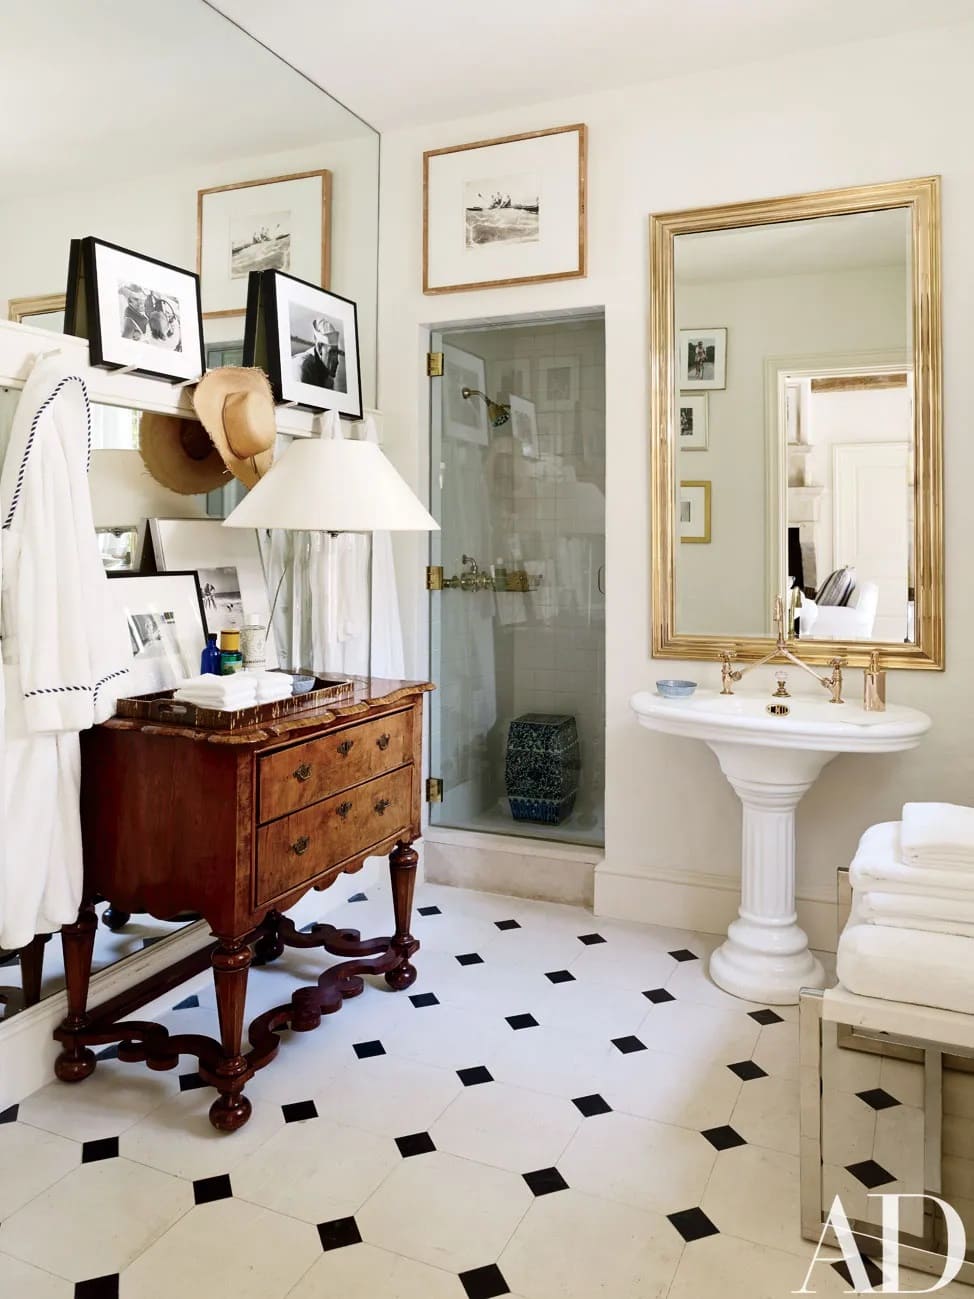 Elegant french style bathroom with antique tiles featured as a example of old homes timeless charm